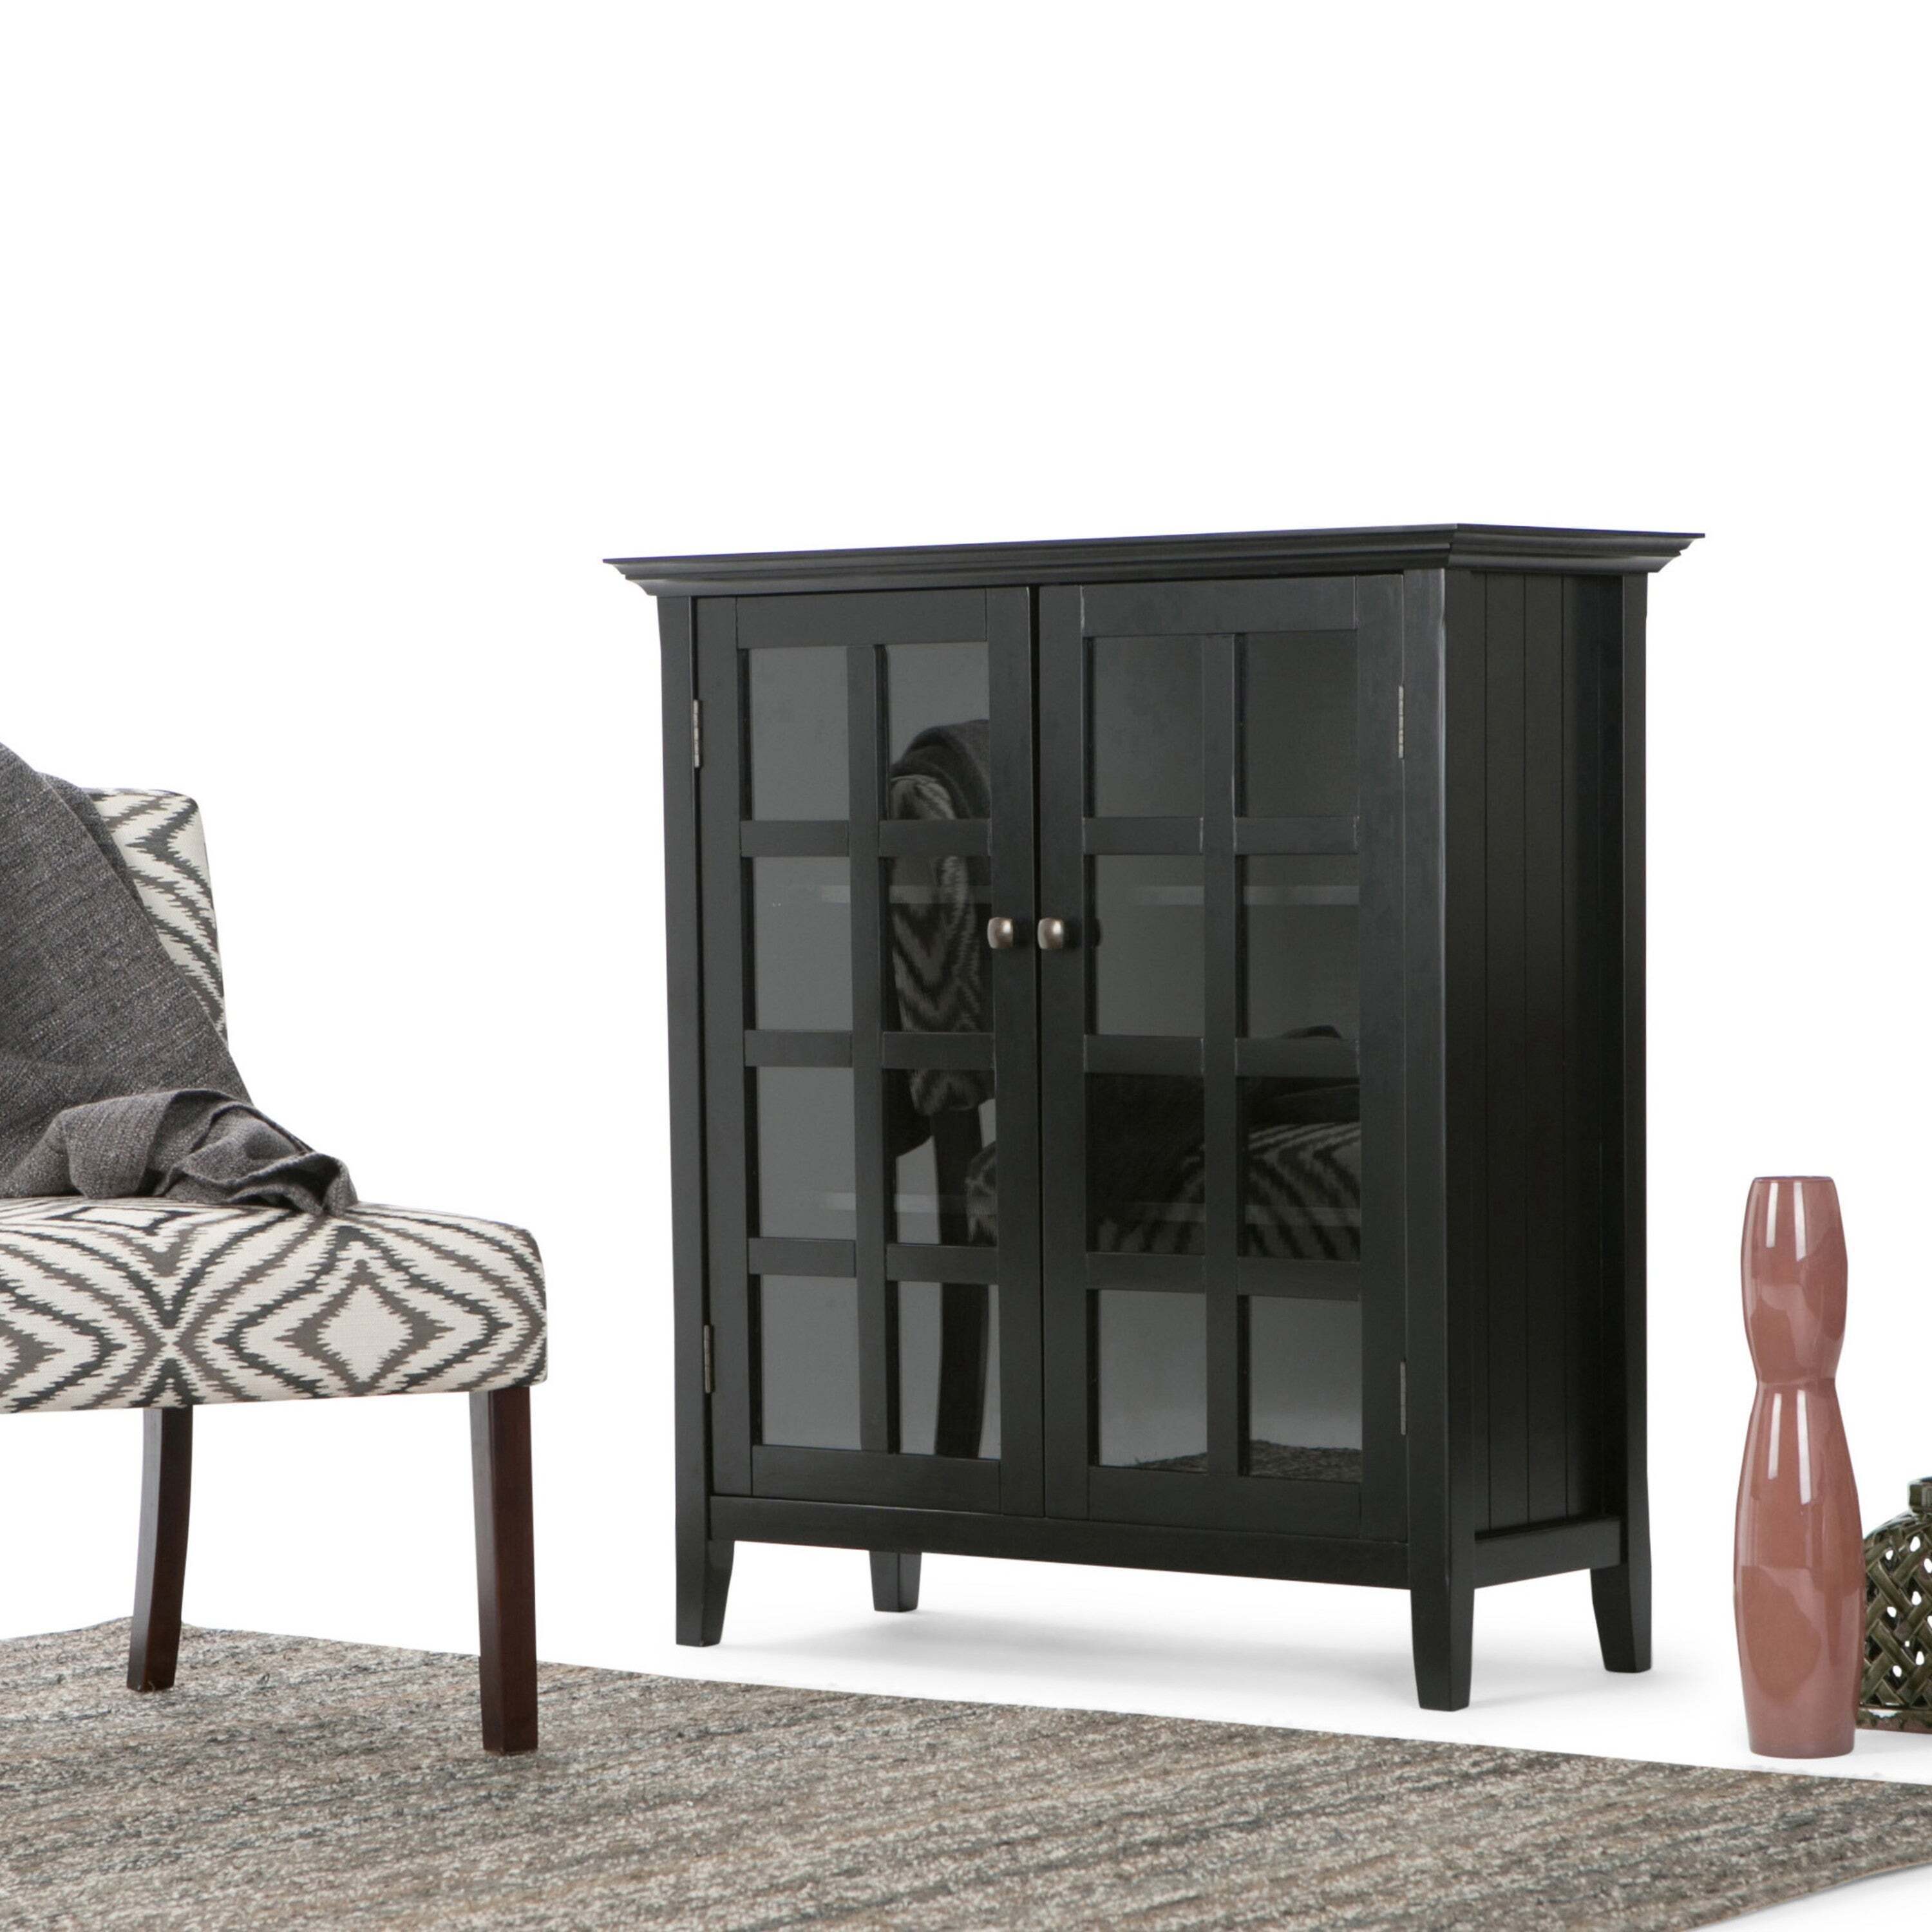 A stately dark wood cabinet with full size glass door inserts